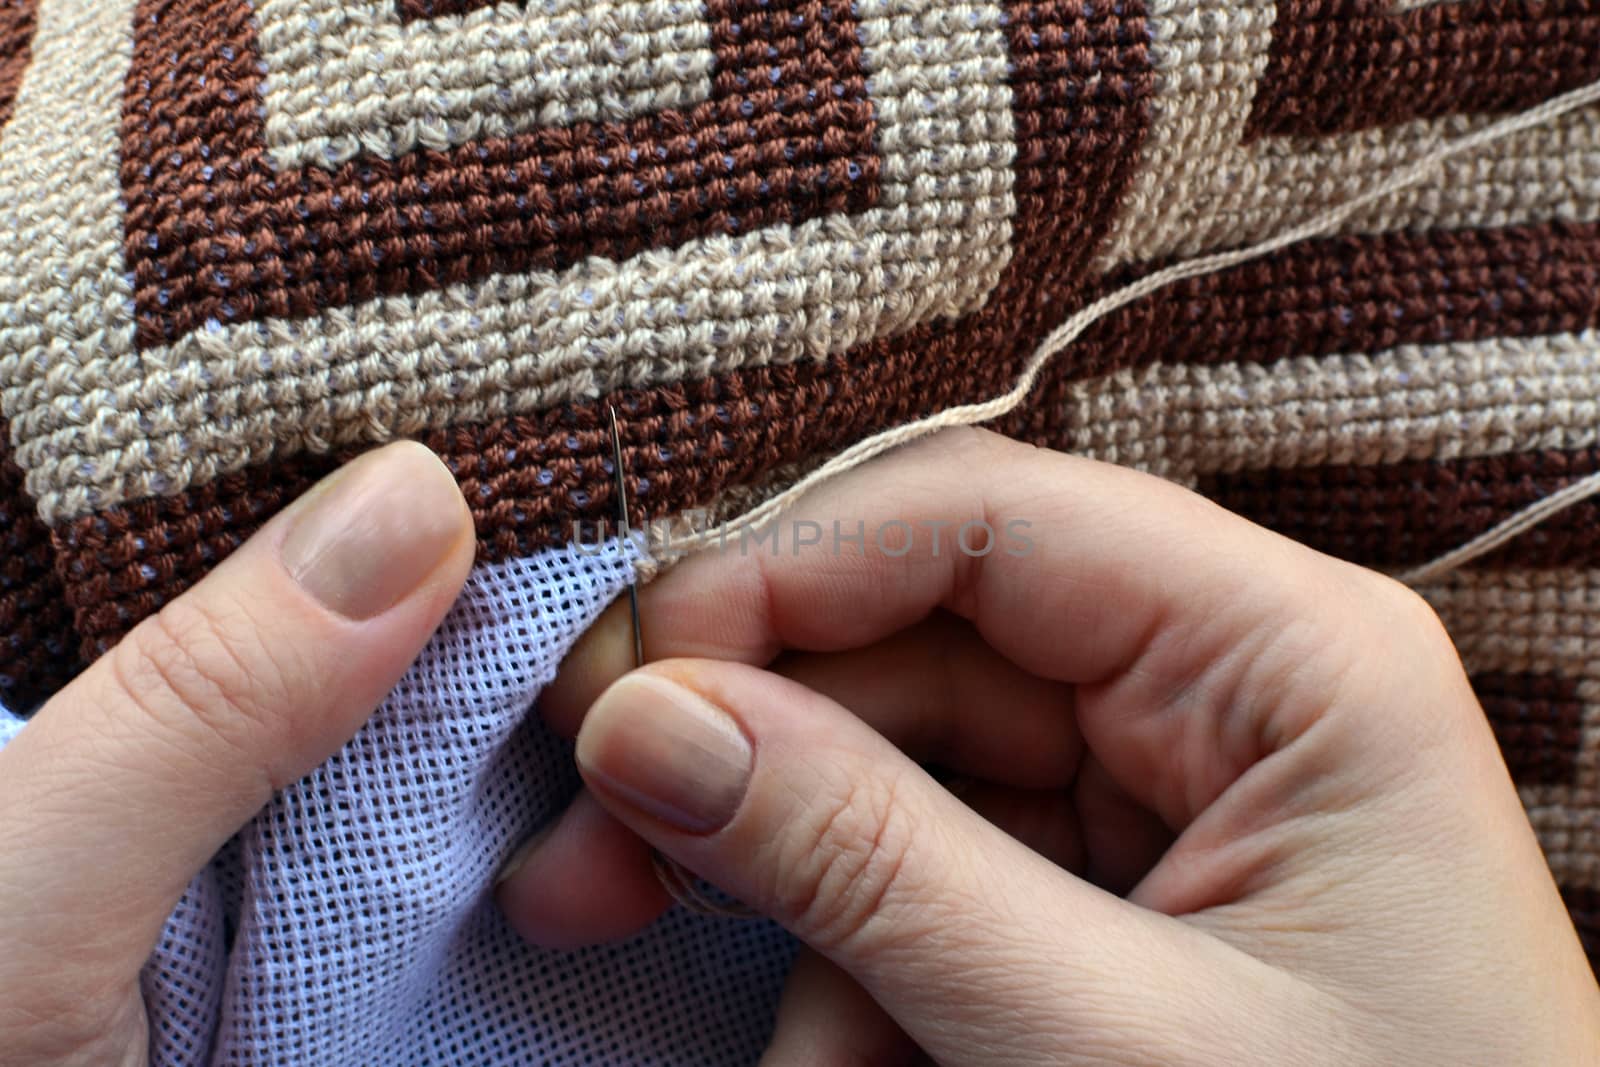 Hands of woman embroidering traditional pattern by hibrida13